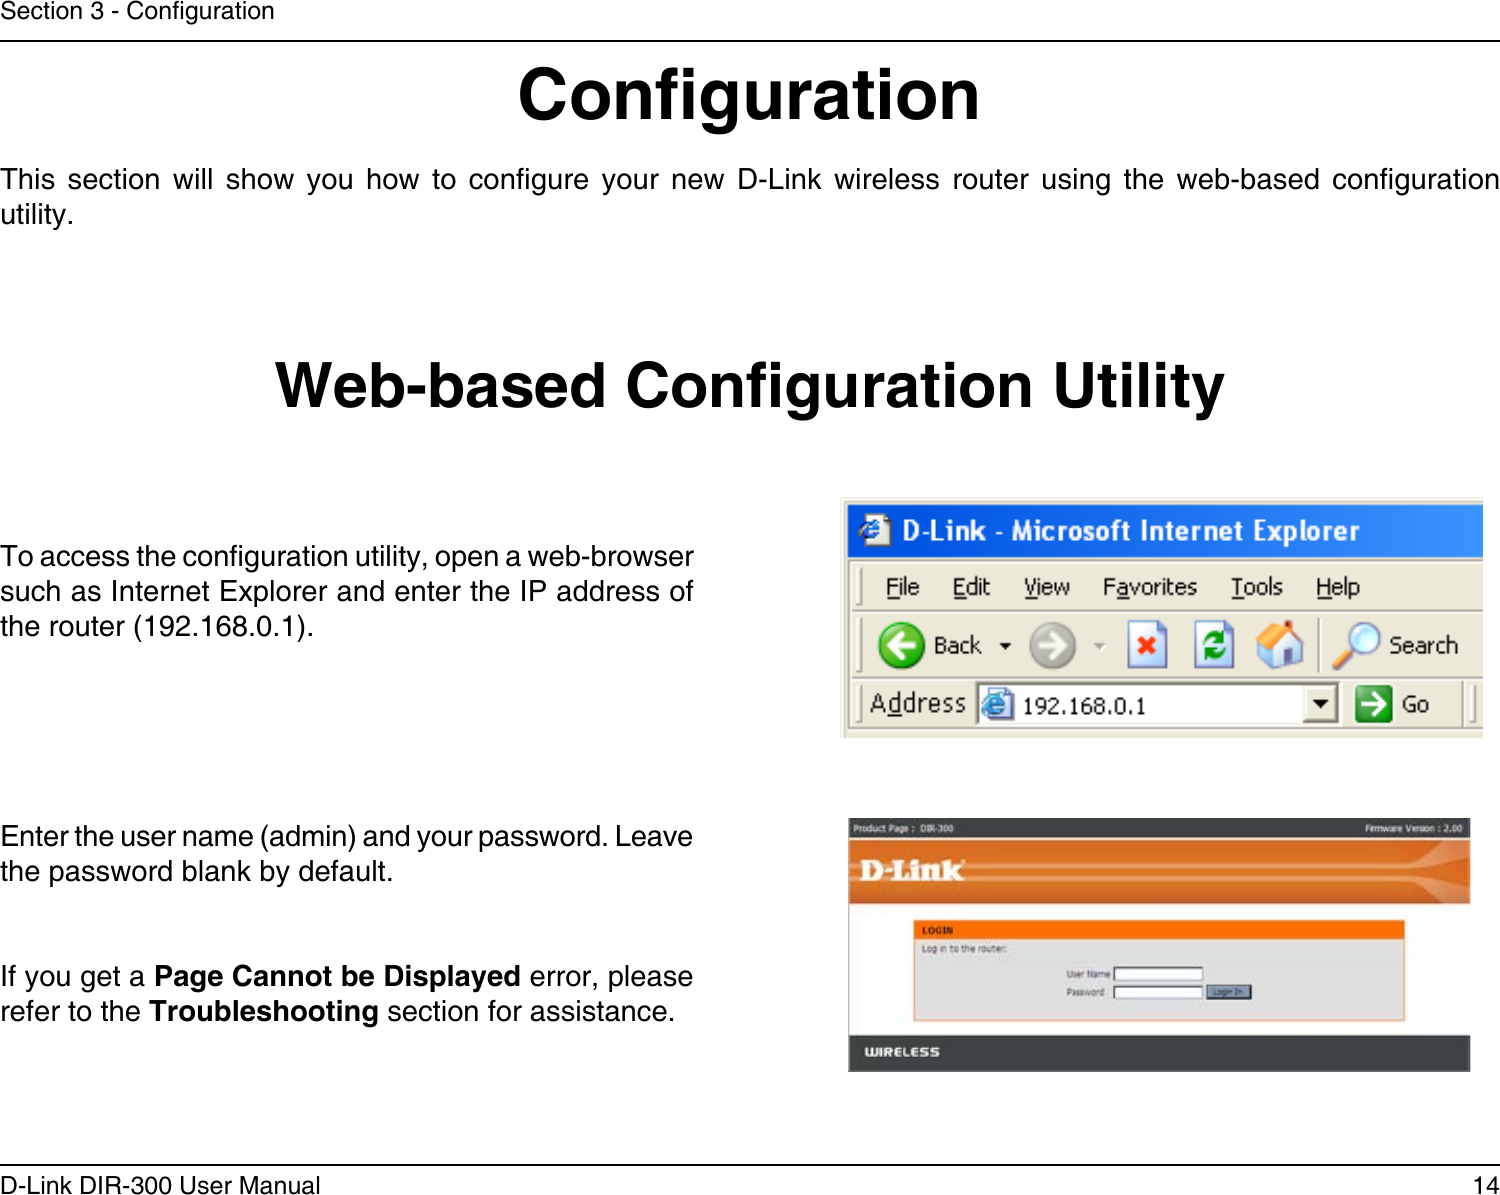 14D-Link DIR-300 User ManualSection 3 - CongurationCongurationThis  section  will  show  you  how  to  congure  your  new  D-Link  wireless  router  using  the  web-based  conguration utility.Web-based Conguration UtilityTo access the conguration utility, open a web-browser such as Internet Explorer and enter the IP address of the router (192.168.0.1).Enter the user name (admin) and your password. Leave the password blank by default.If you get a Page Cannot be Displayed error, please refer to the Troubleshooting section for assistance.